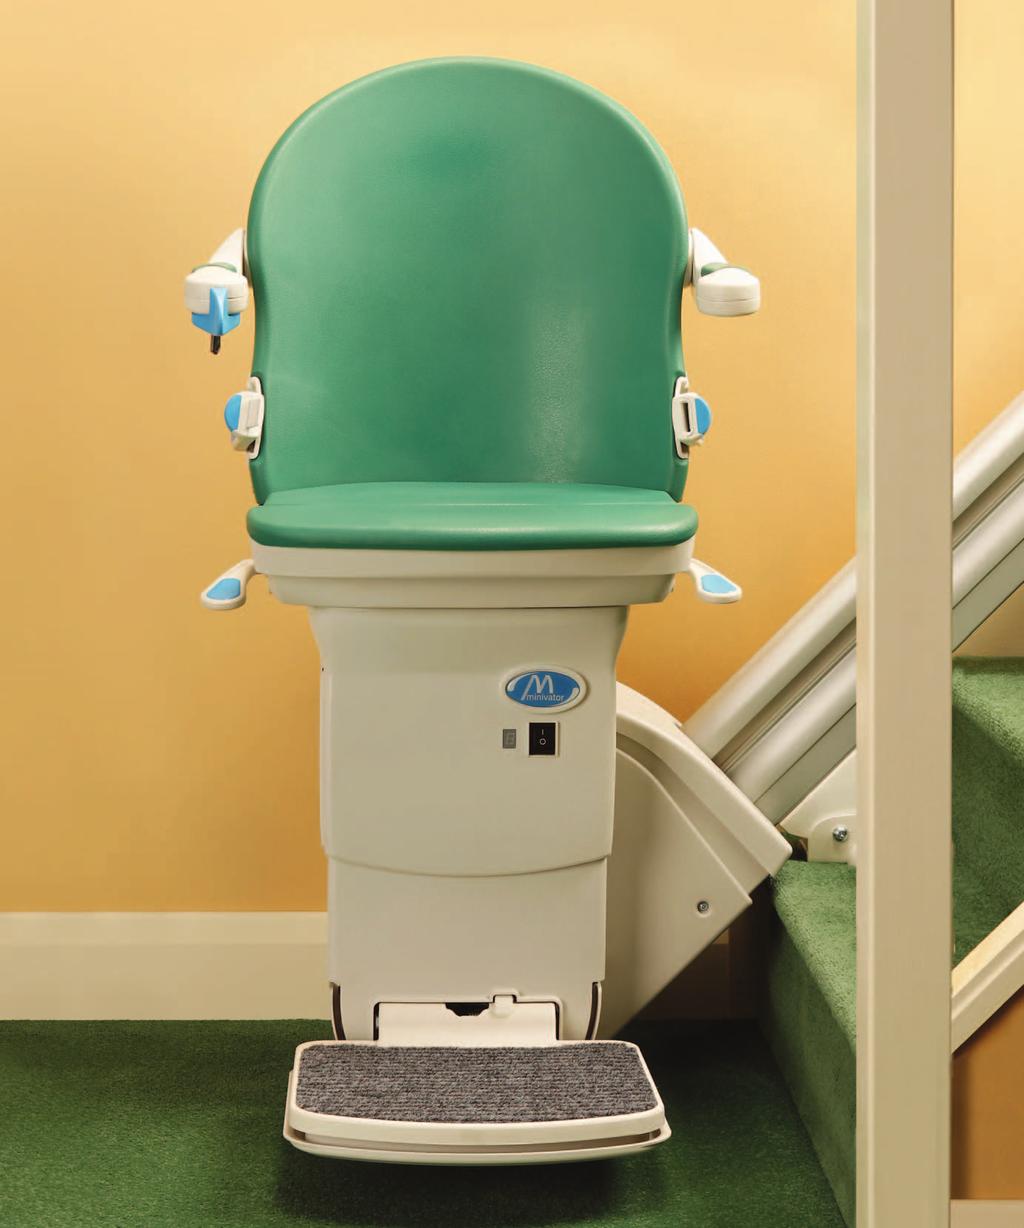 Minivator 1000 Straight Stairlift For those looking for minimal track intrusion into the staircase, the Minivator 1000 offers one of the slimmest straight stairlift tracks on the market.